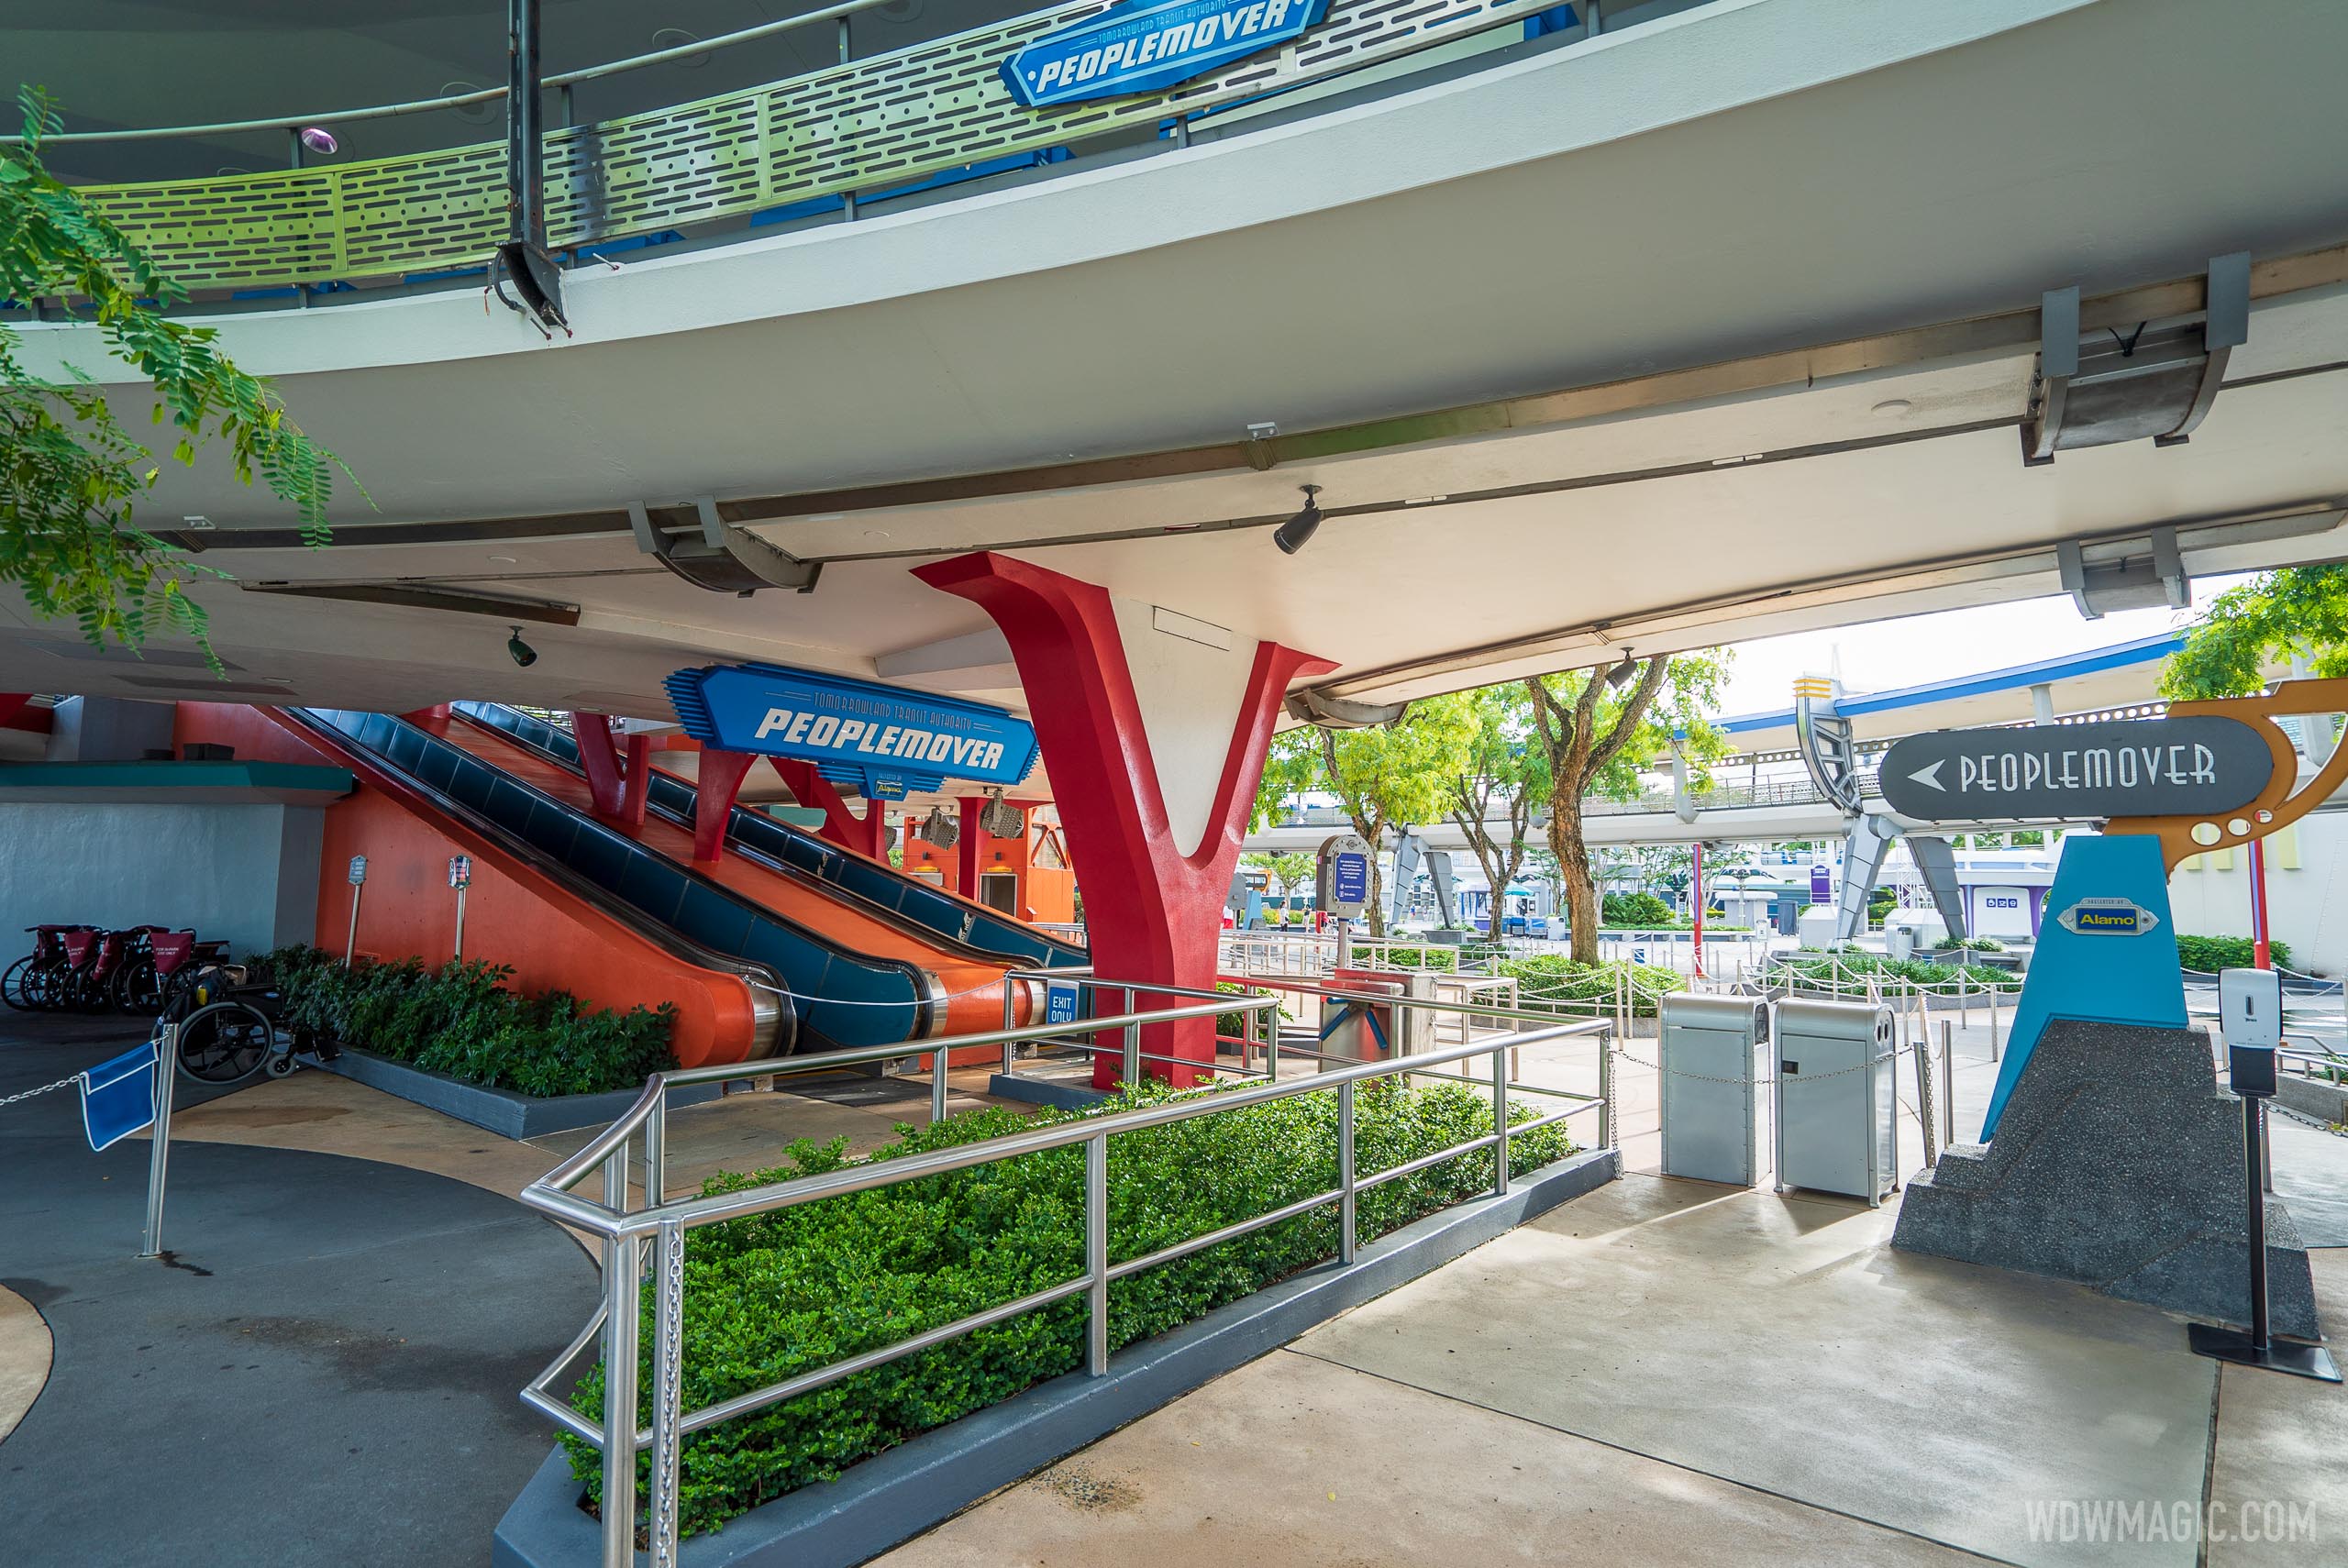 Tomorrowland Transit Authority PeopleMover refurbishment extends to almost the end of the year